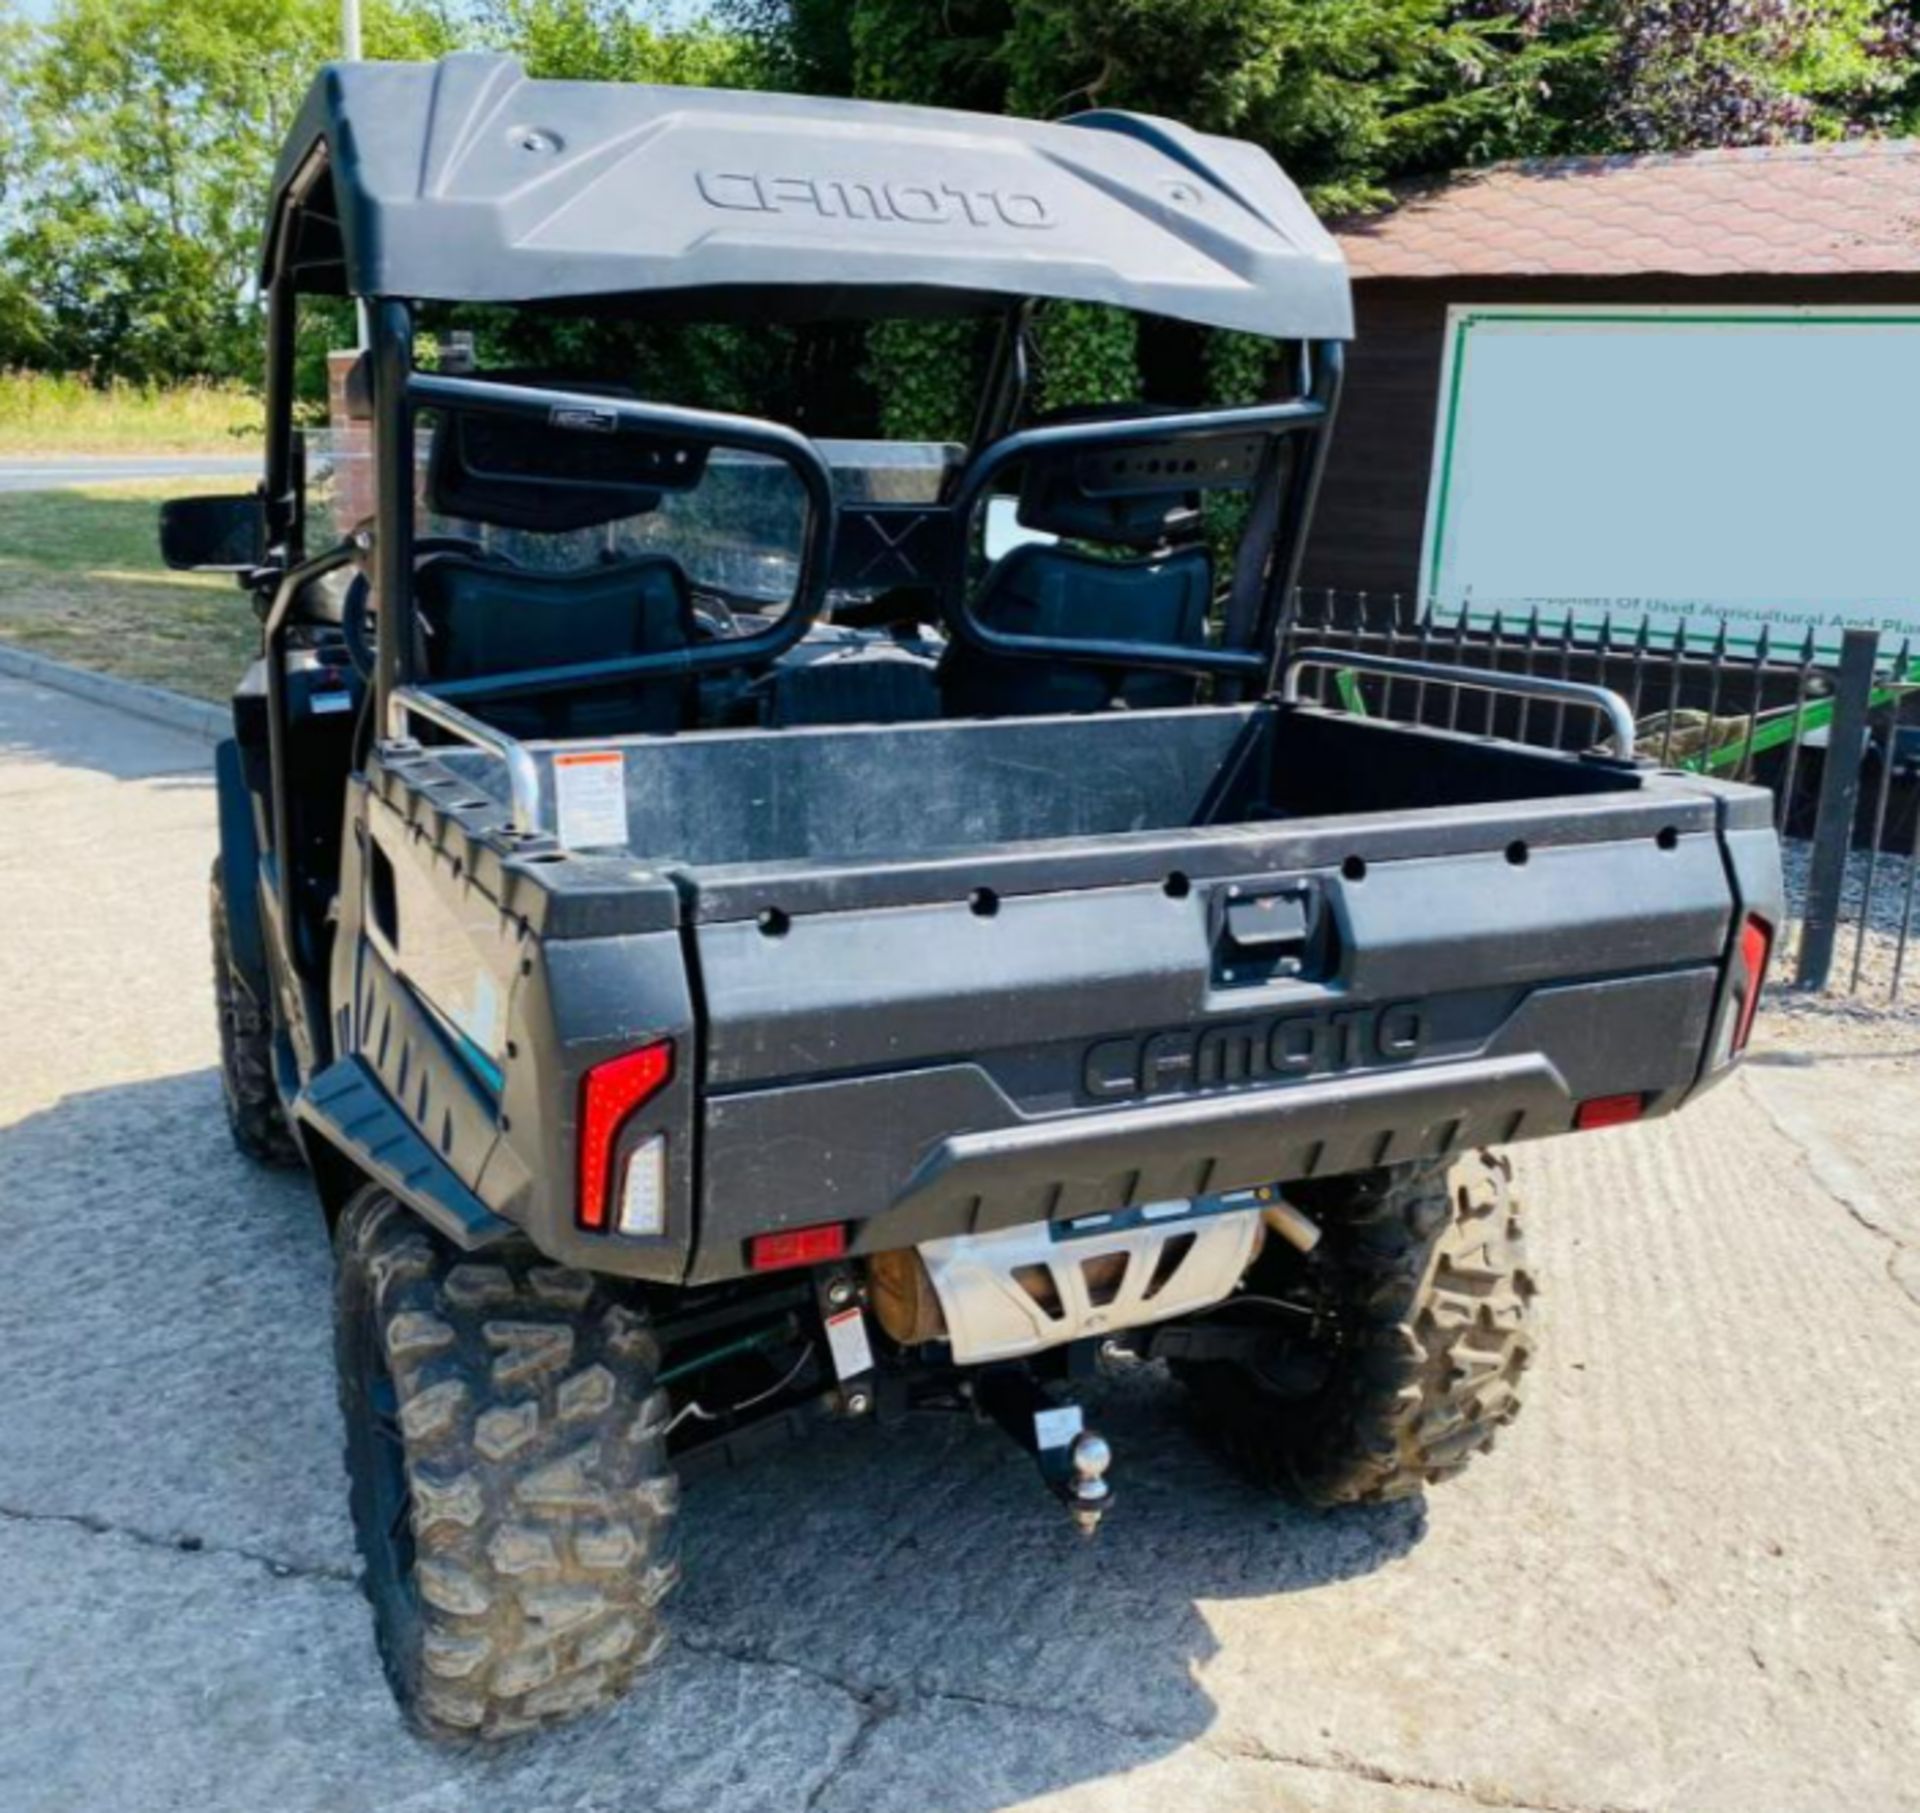 CF MOTO UFORCE 550 UTV BUGGIE * YEAR 2016 , ONLY 351 MILES * C/W REMOTE CONTROL WINCH - Image 2 of 14